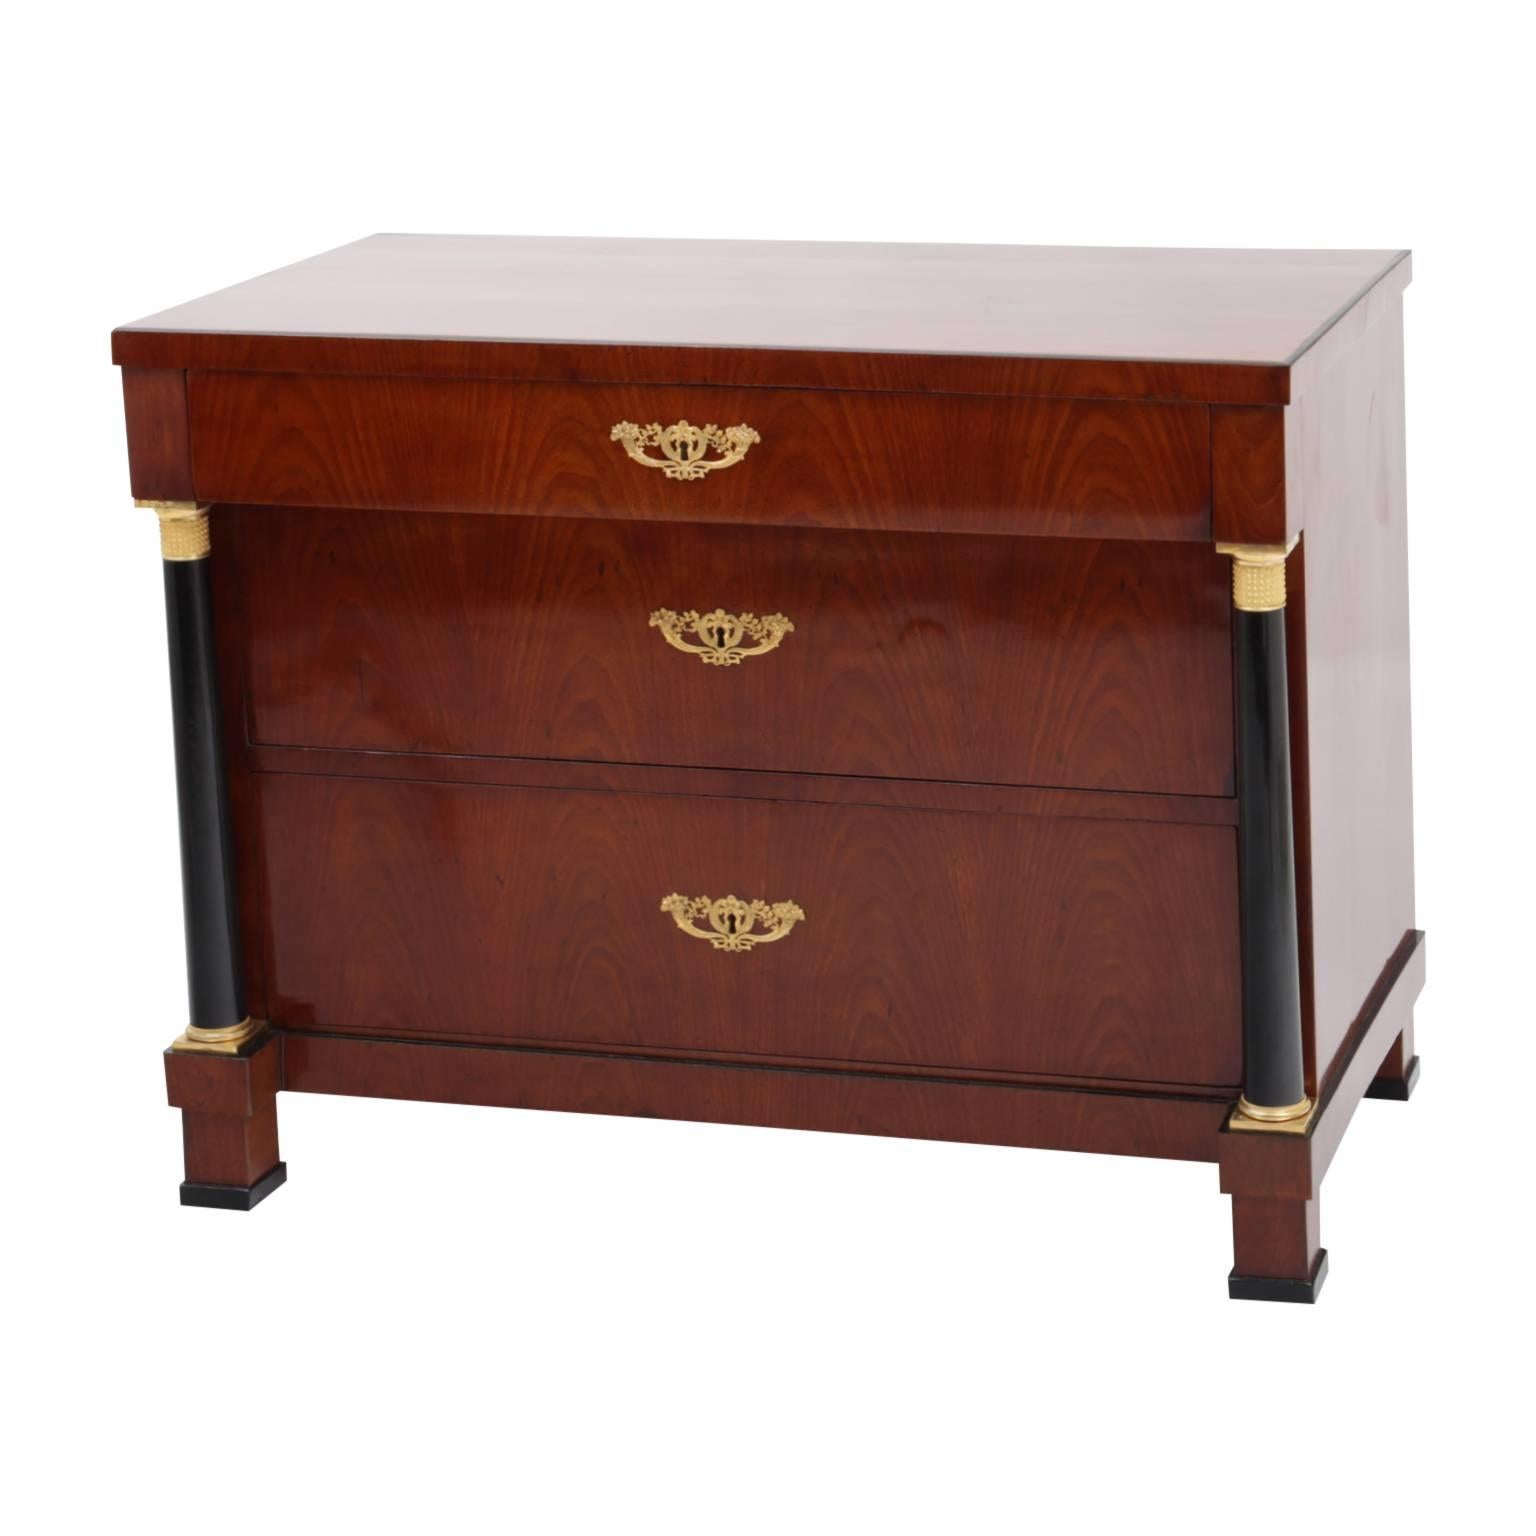 A pair of three-drawered Biedermeier chests with a mahogany veneer. Each of the dressers features two free-standing ebonized columns at each corner on the front of the pieces. The columns are topped with fire gilded capitals. The fittings were